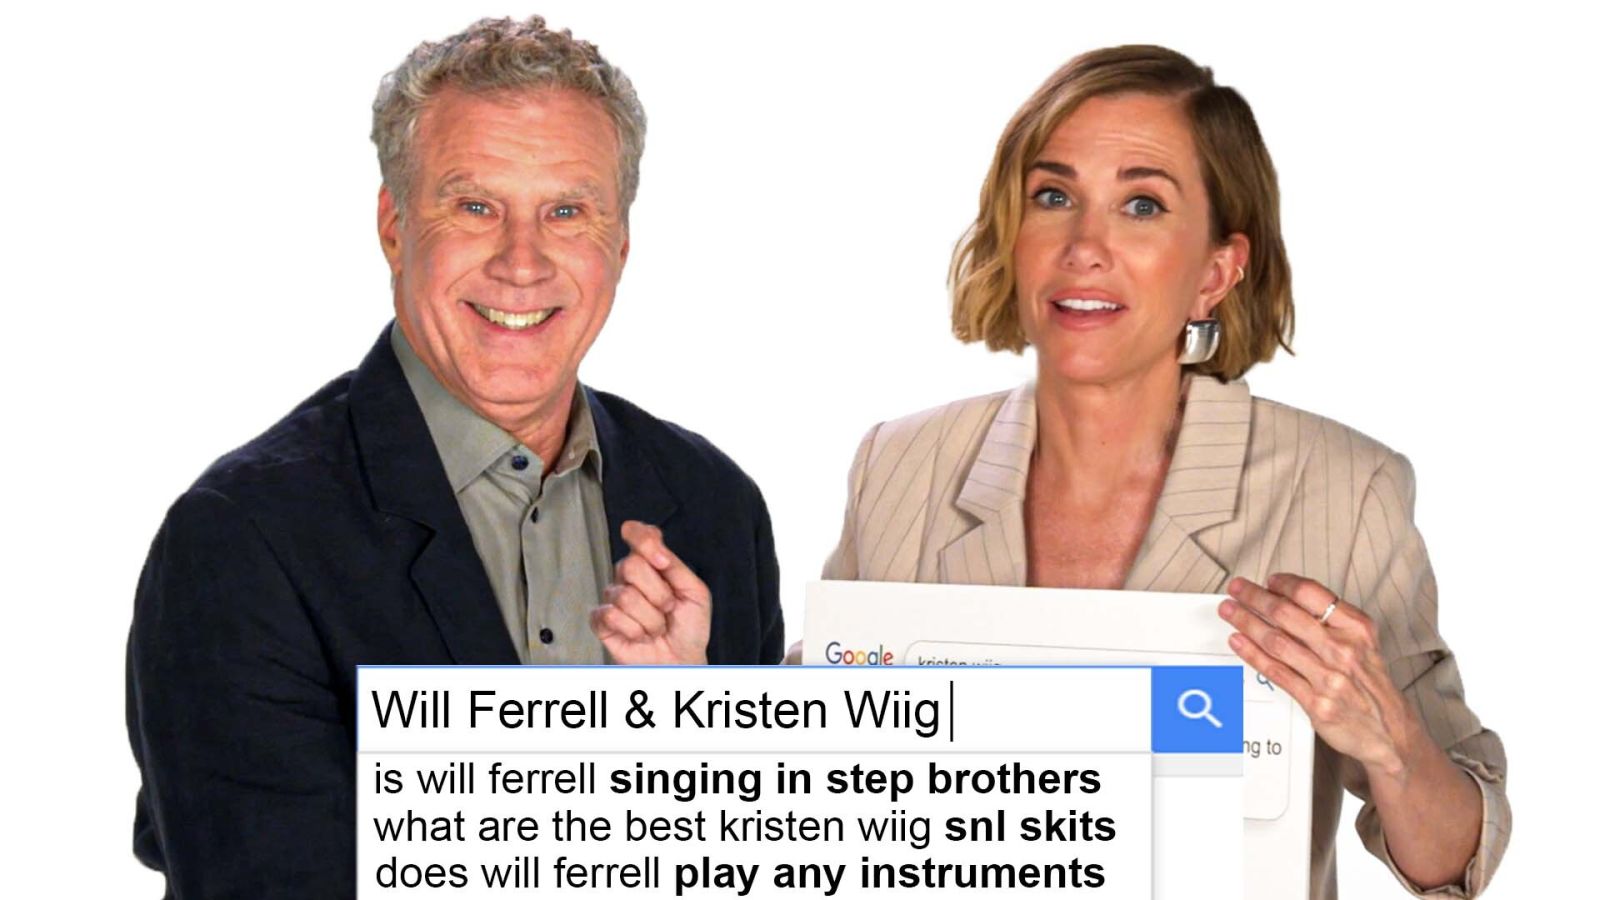 Will Ferrell & Kristen Wiig Answer The Web's Most Searched Questions